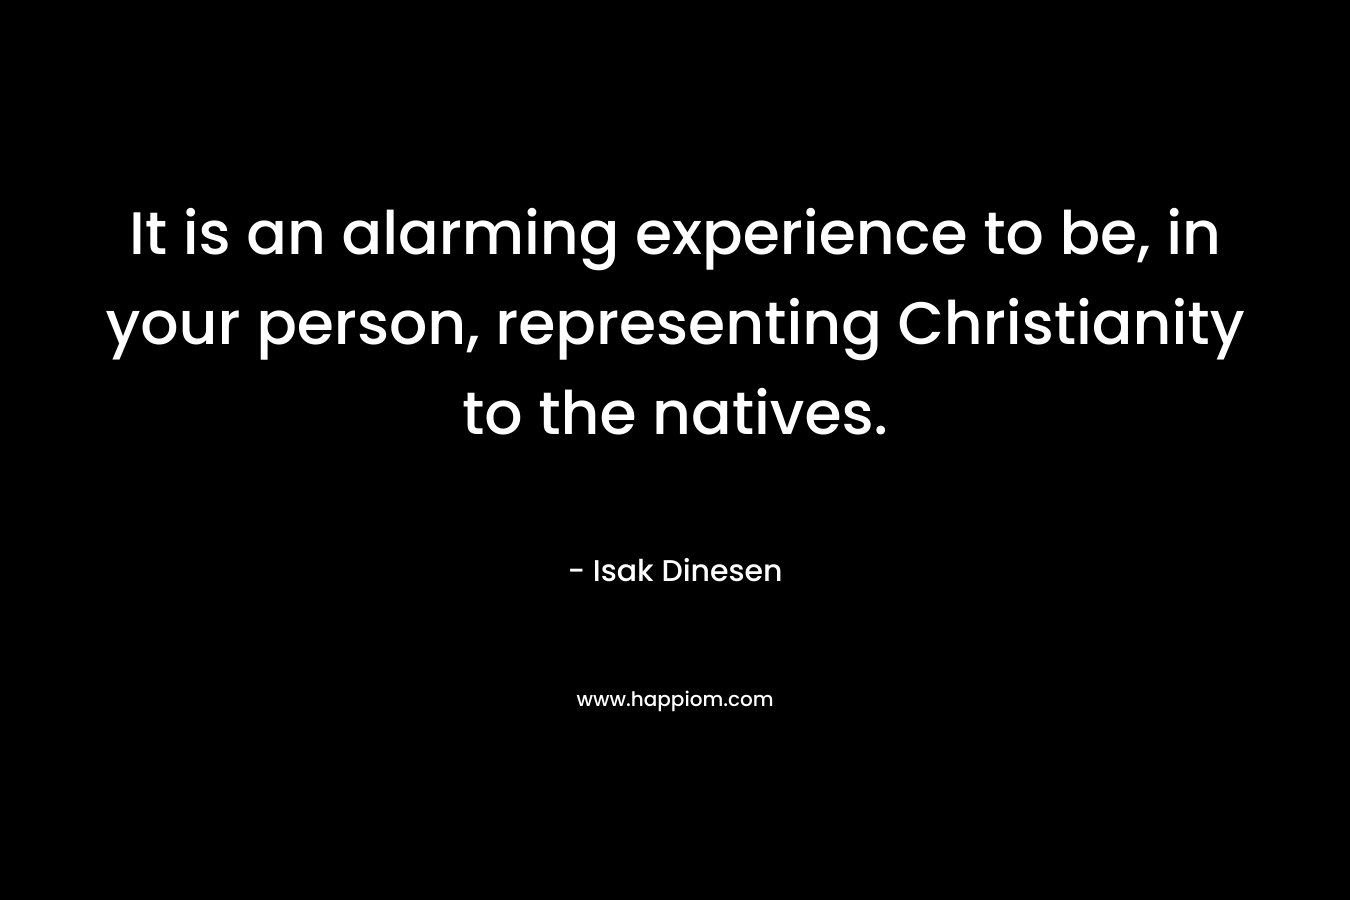 It is an alarming experience to be, in your person, representing Christianity to the natives. – Isak Dinesen